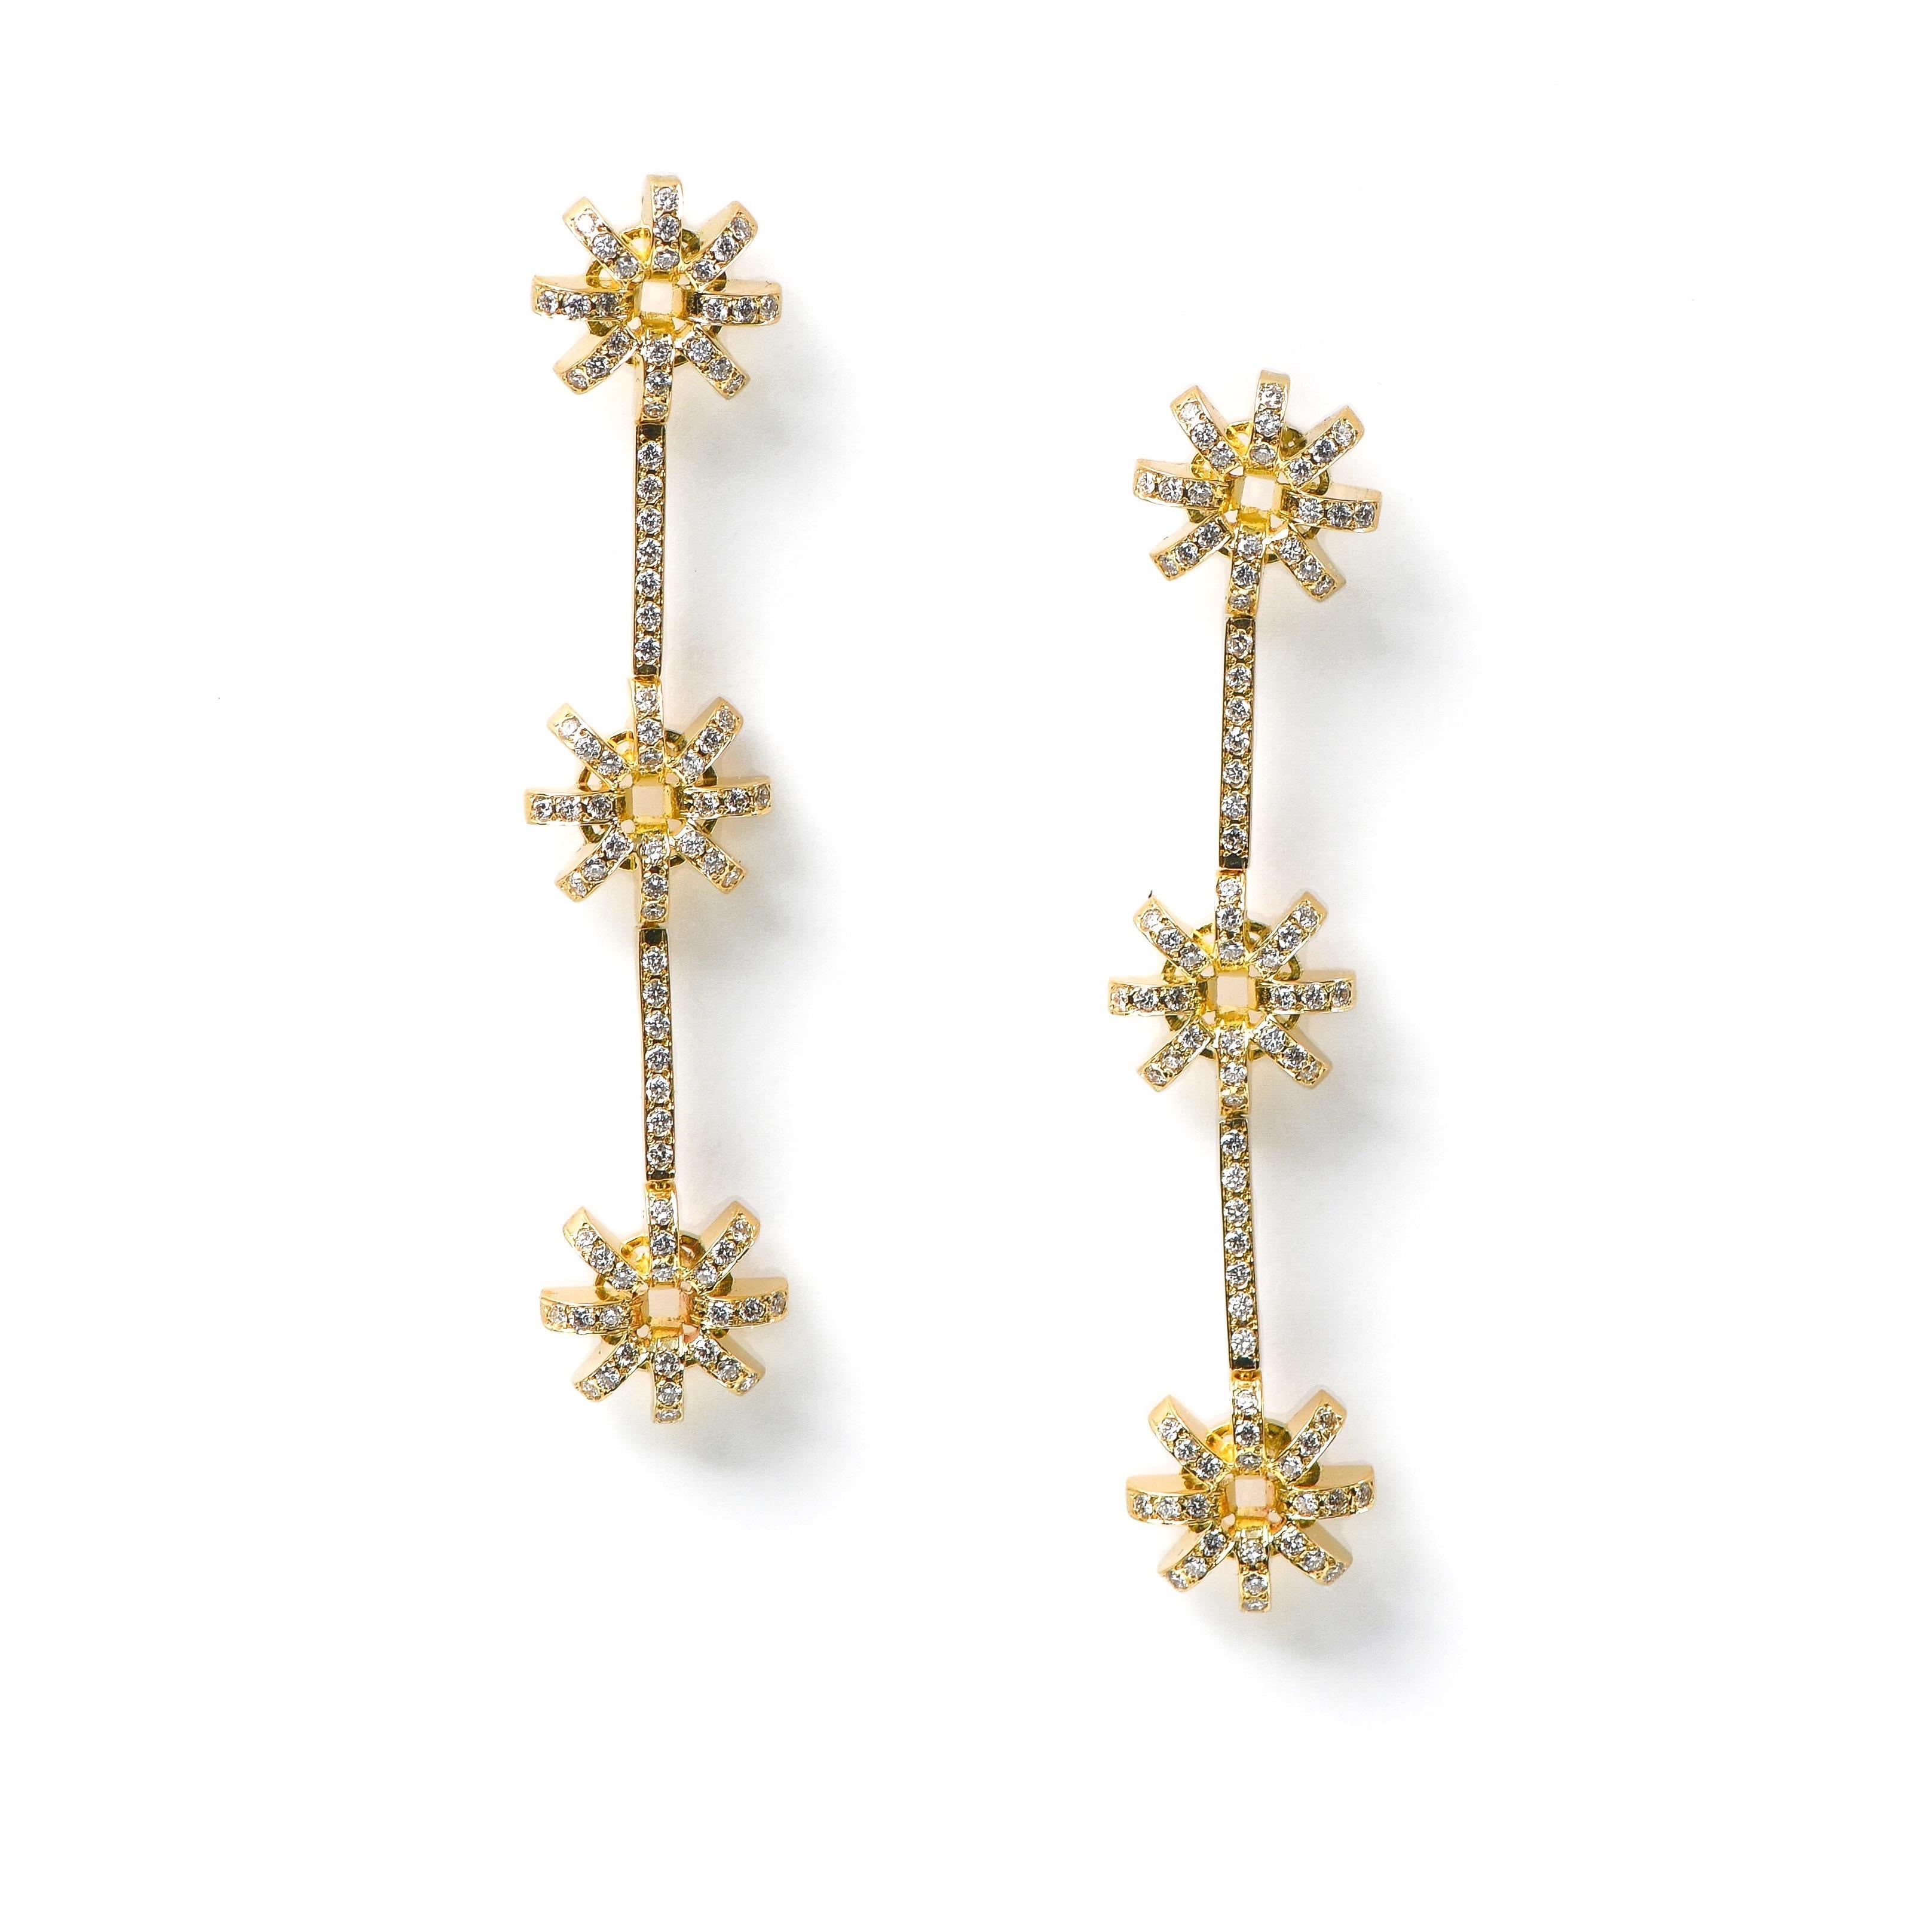 The ‘Triple Flower’, drop earrings are crafted in 18k gold, hallmarked in Cyprus. These super impressive, drop earrings, fit code a gala event or a wedding occasion, also make a perfect choice bridal earrings. They come in a highly polished finish